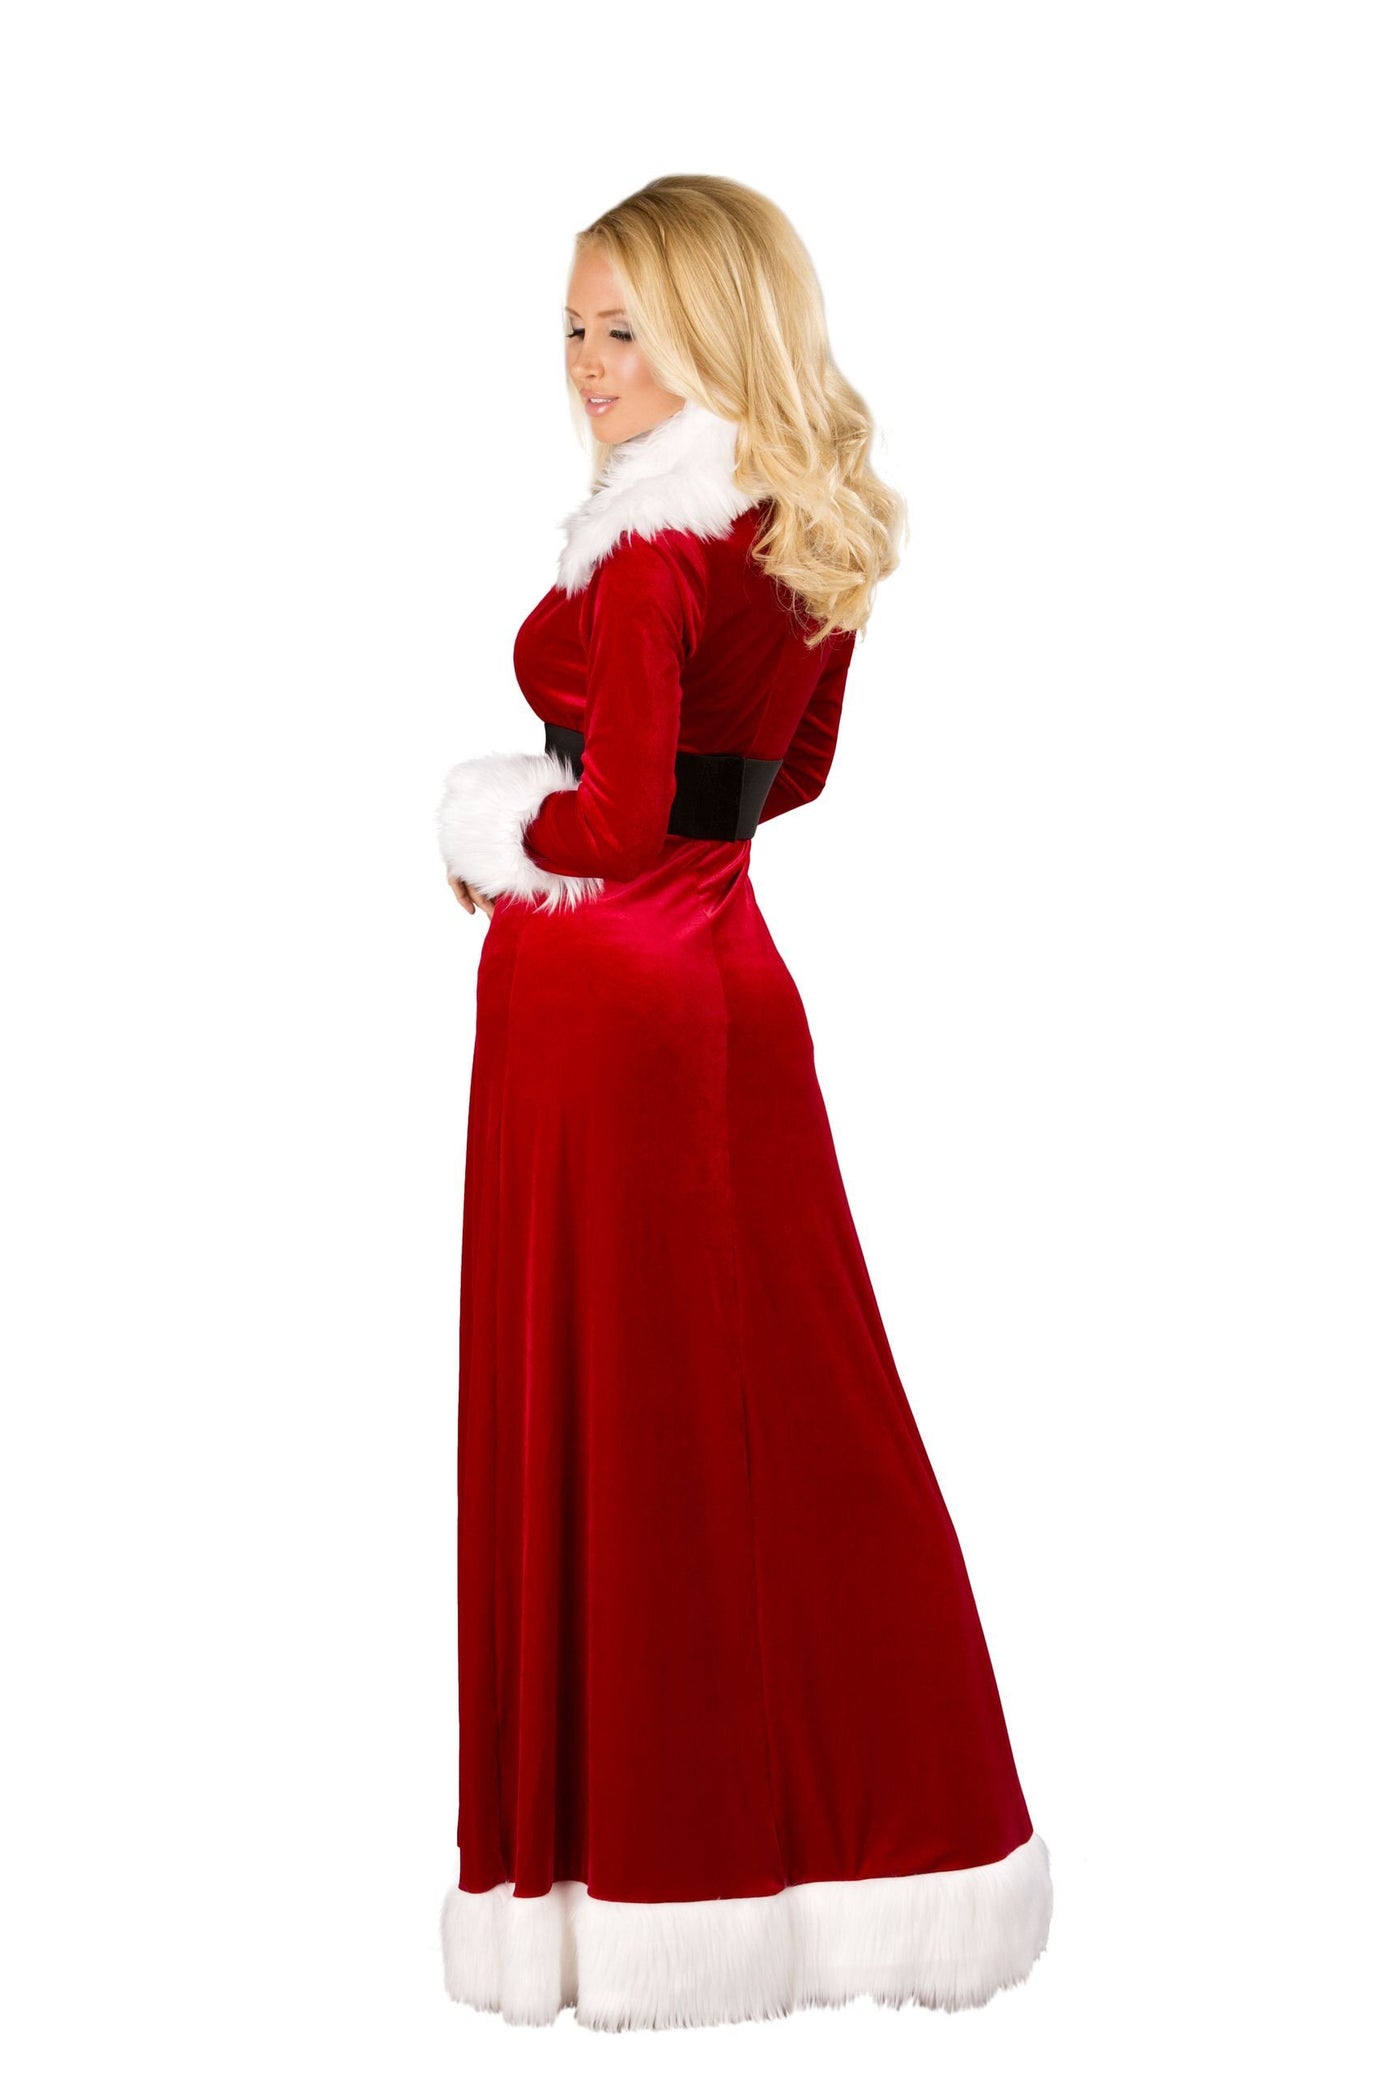 Buy 3pc Sexy Miss Claus from RomaRetailShop for 118.99 with Same Day Shipping Designed by Roma Costume C170-AS-S/M